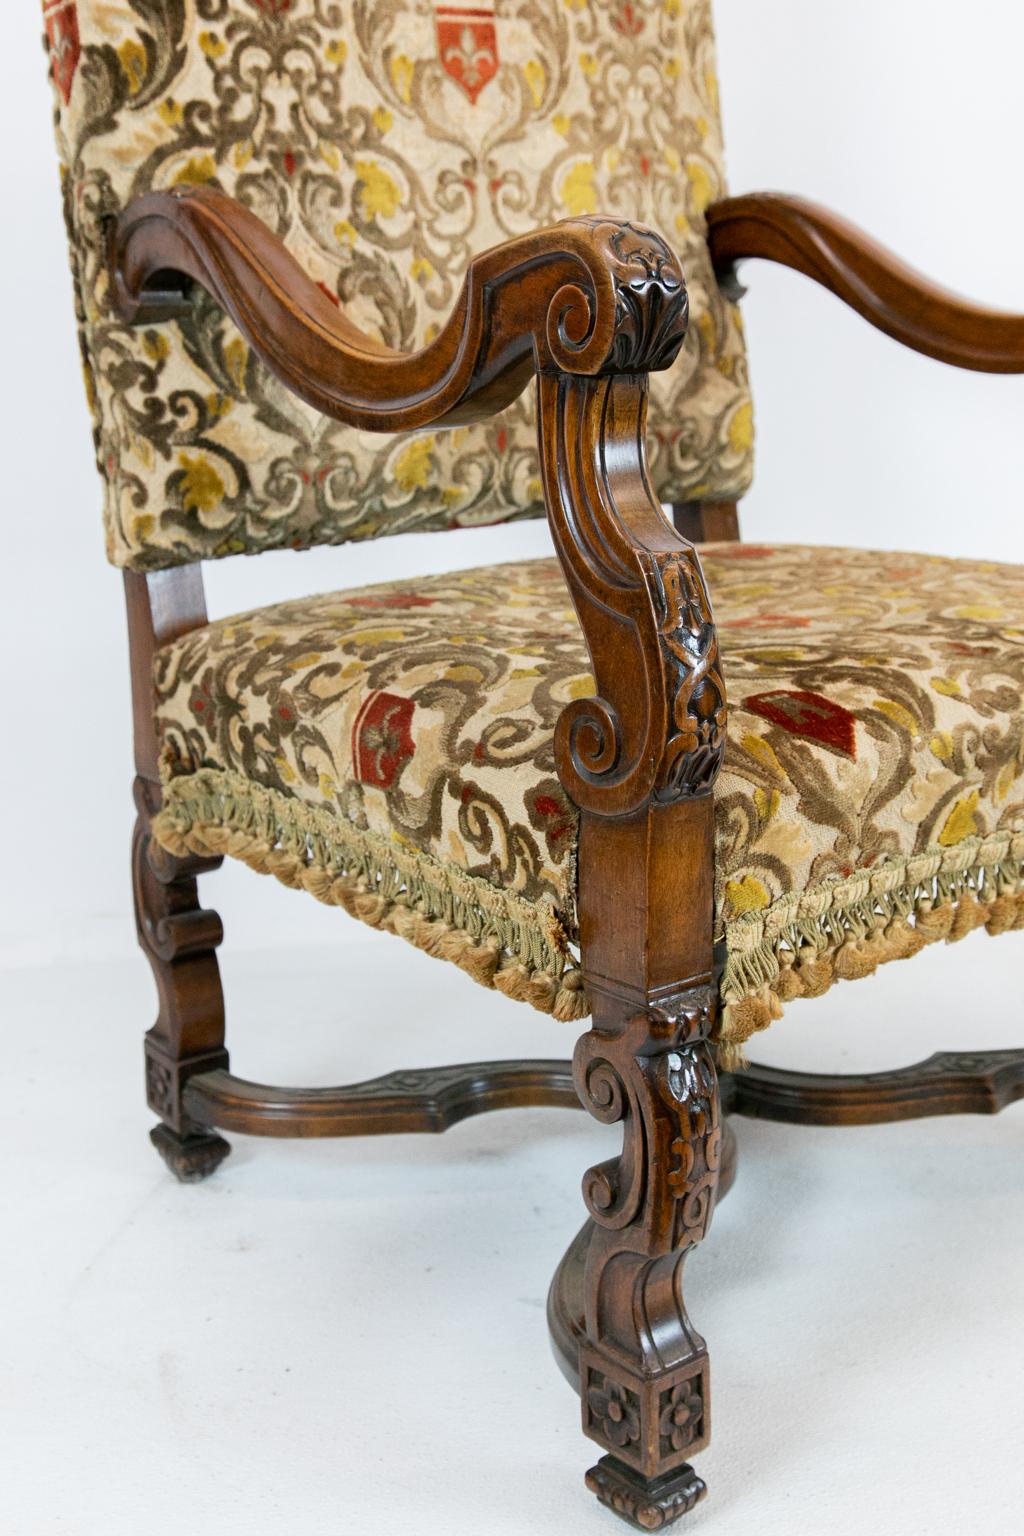 Mahogany English carved walnut upholstered crewel work armchair is carved with acanthus leaf and has shaped sides with bellflower and interlaced ribbon. It has a molded shaped cross stretcher with a carved flower finial. The crewel work extends to